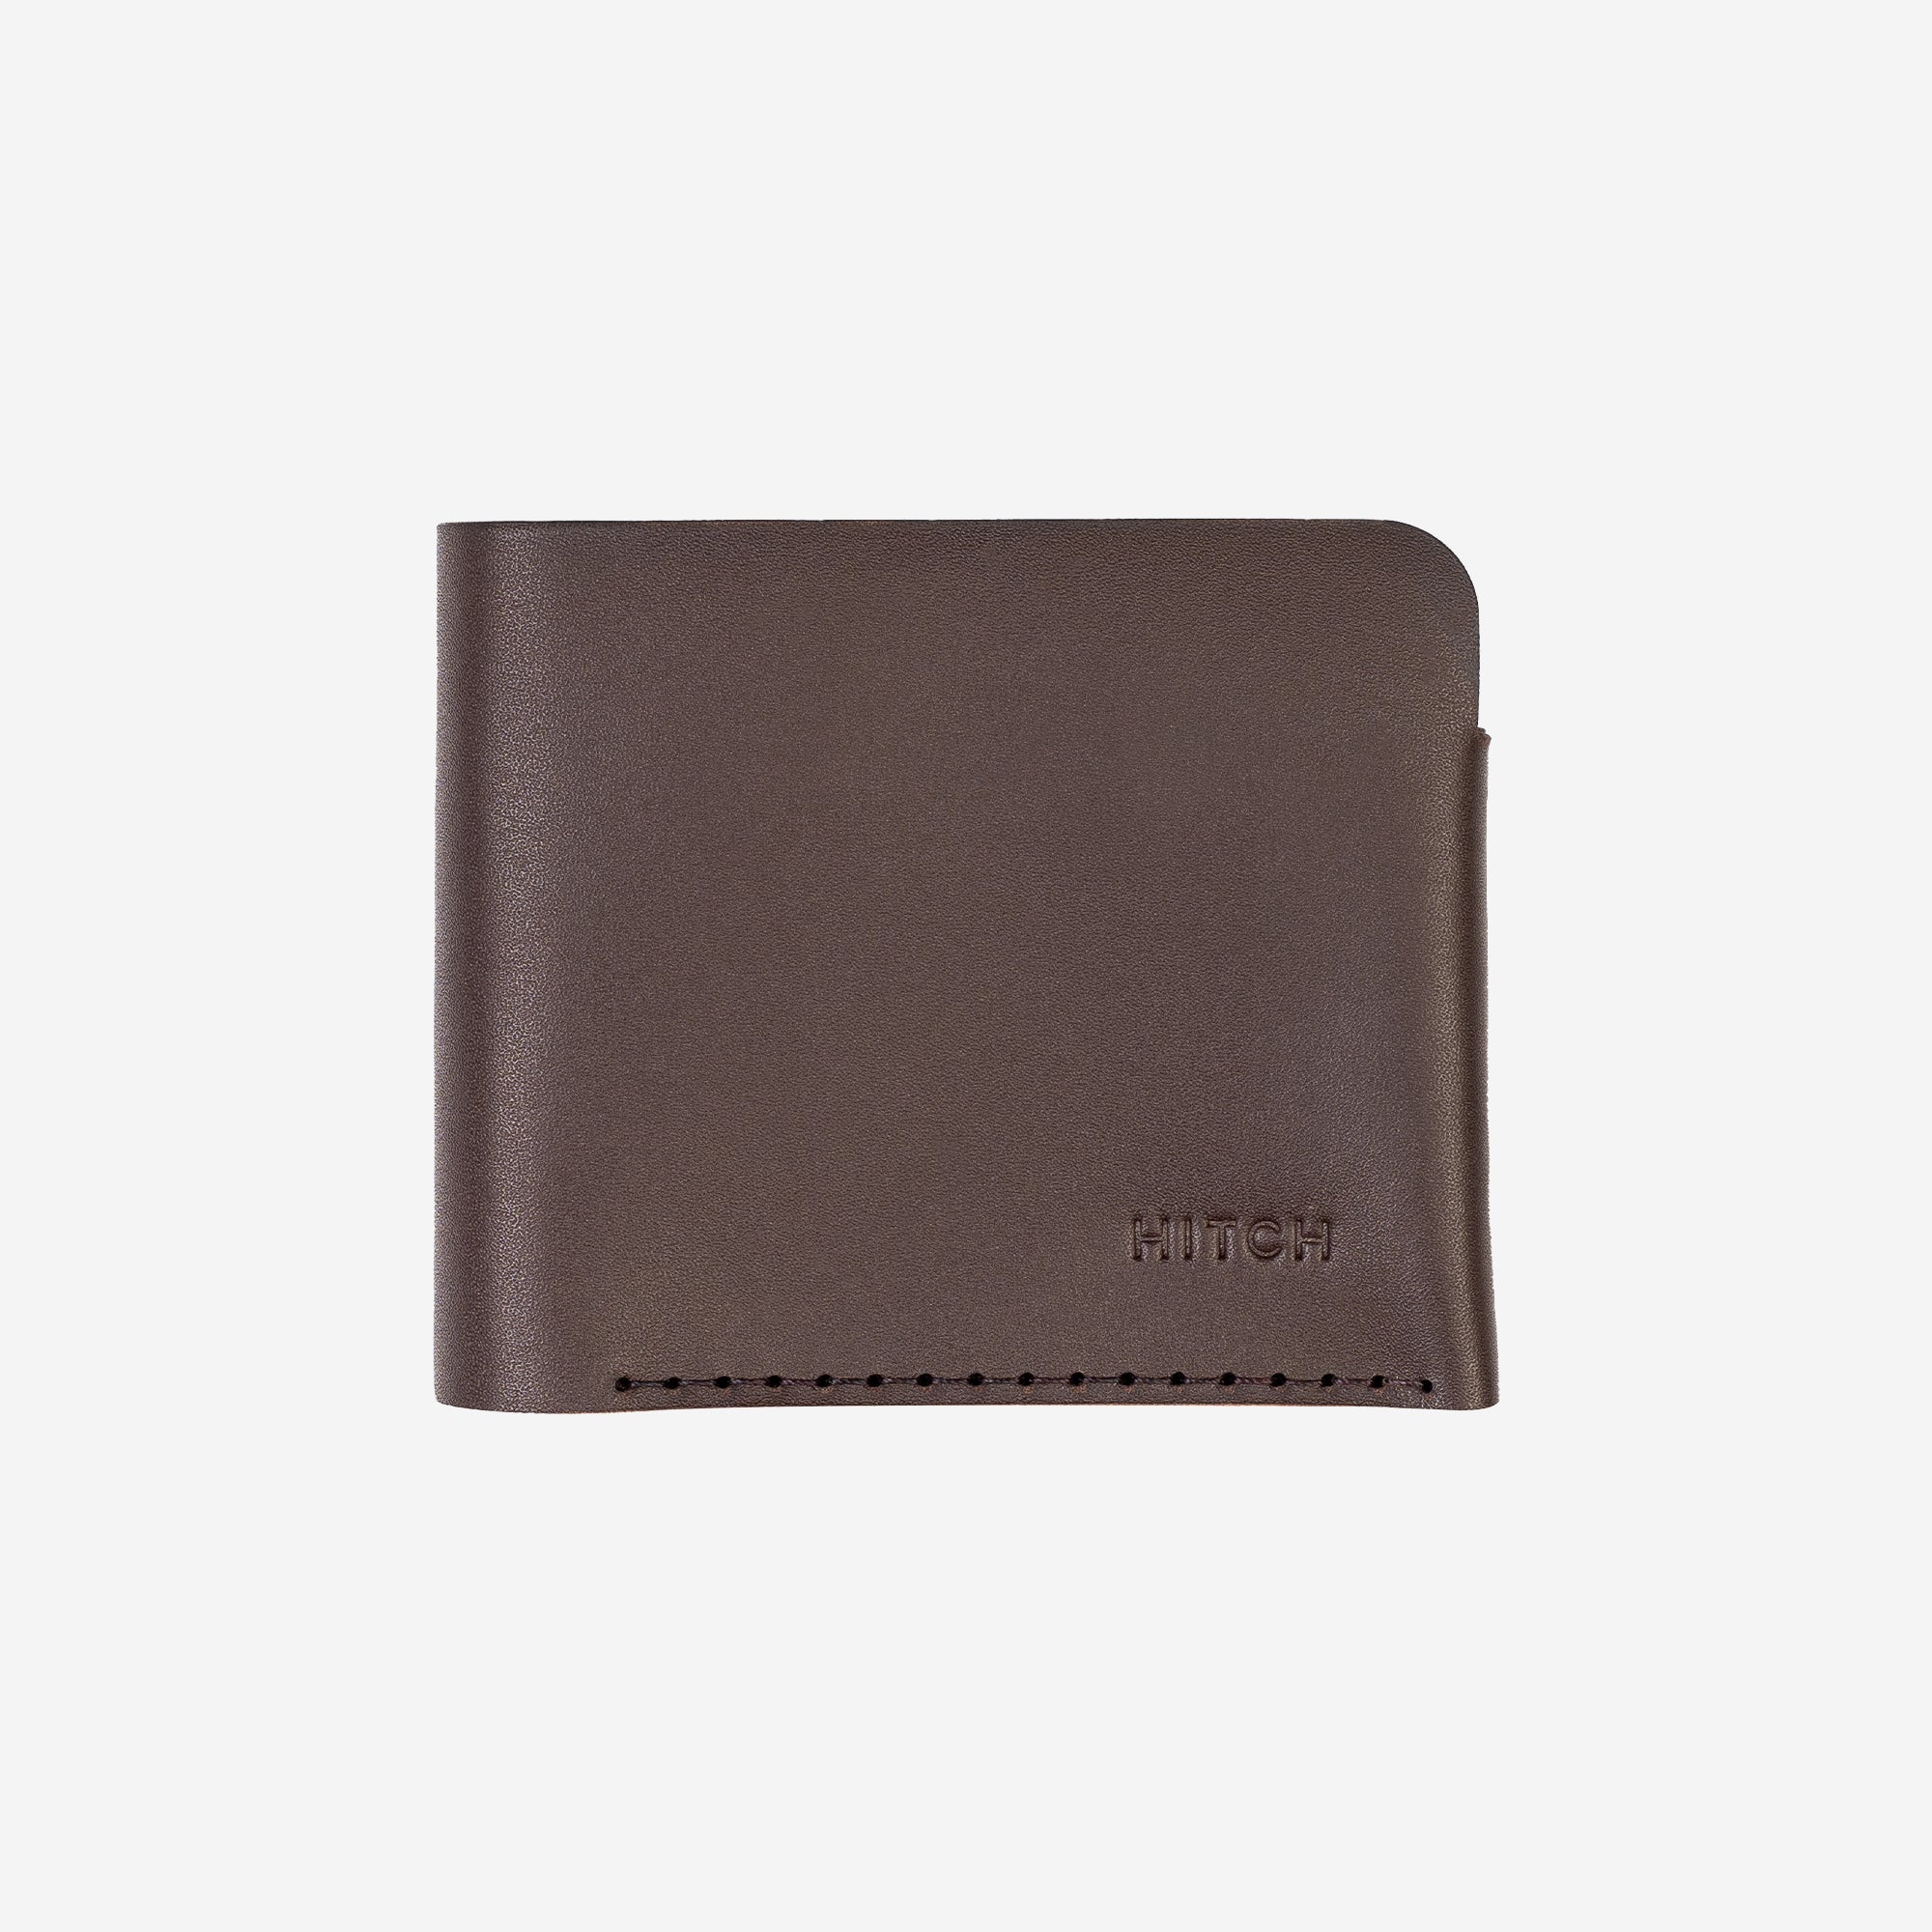 Brown leather bifold wallet with brand logo "HITCH", on white background.